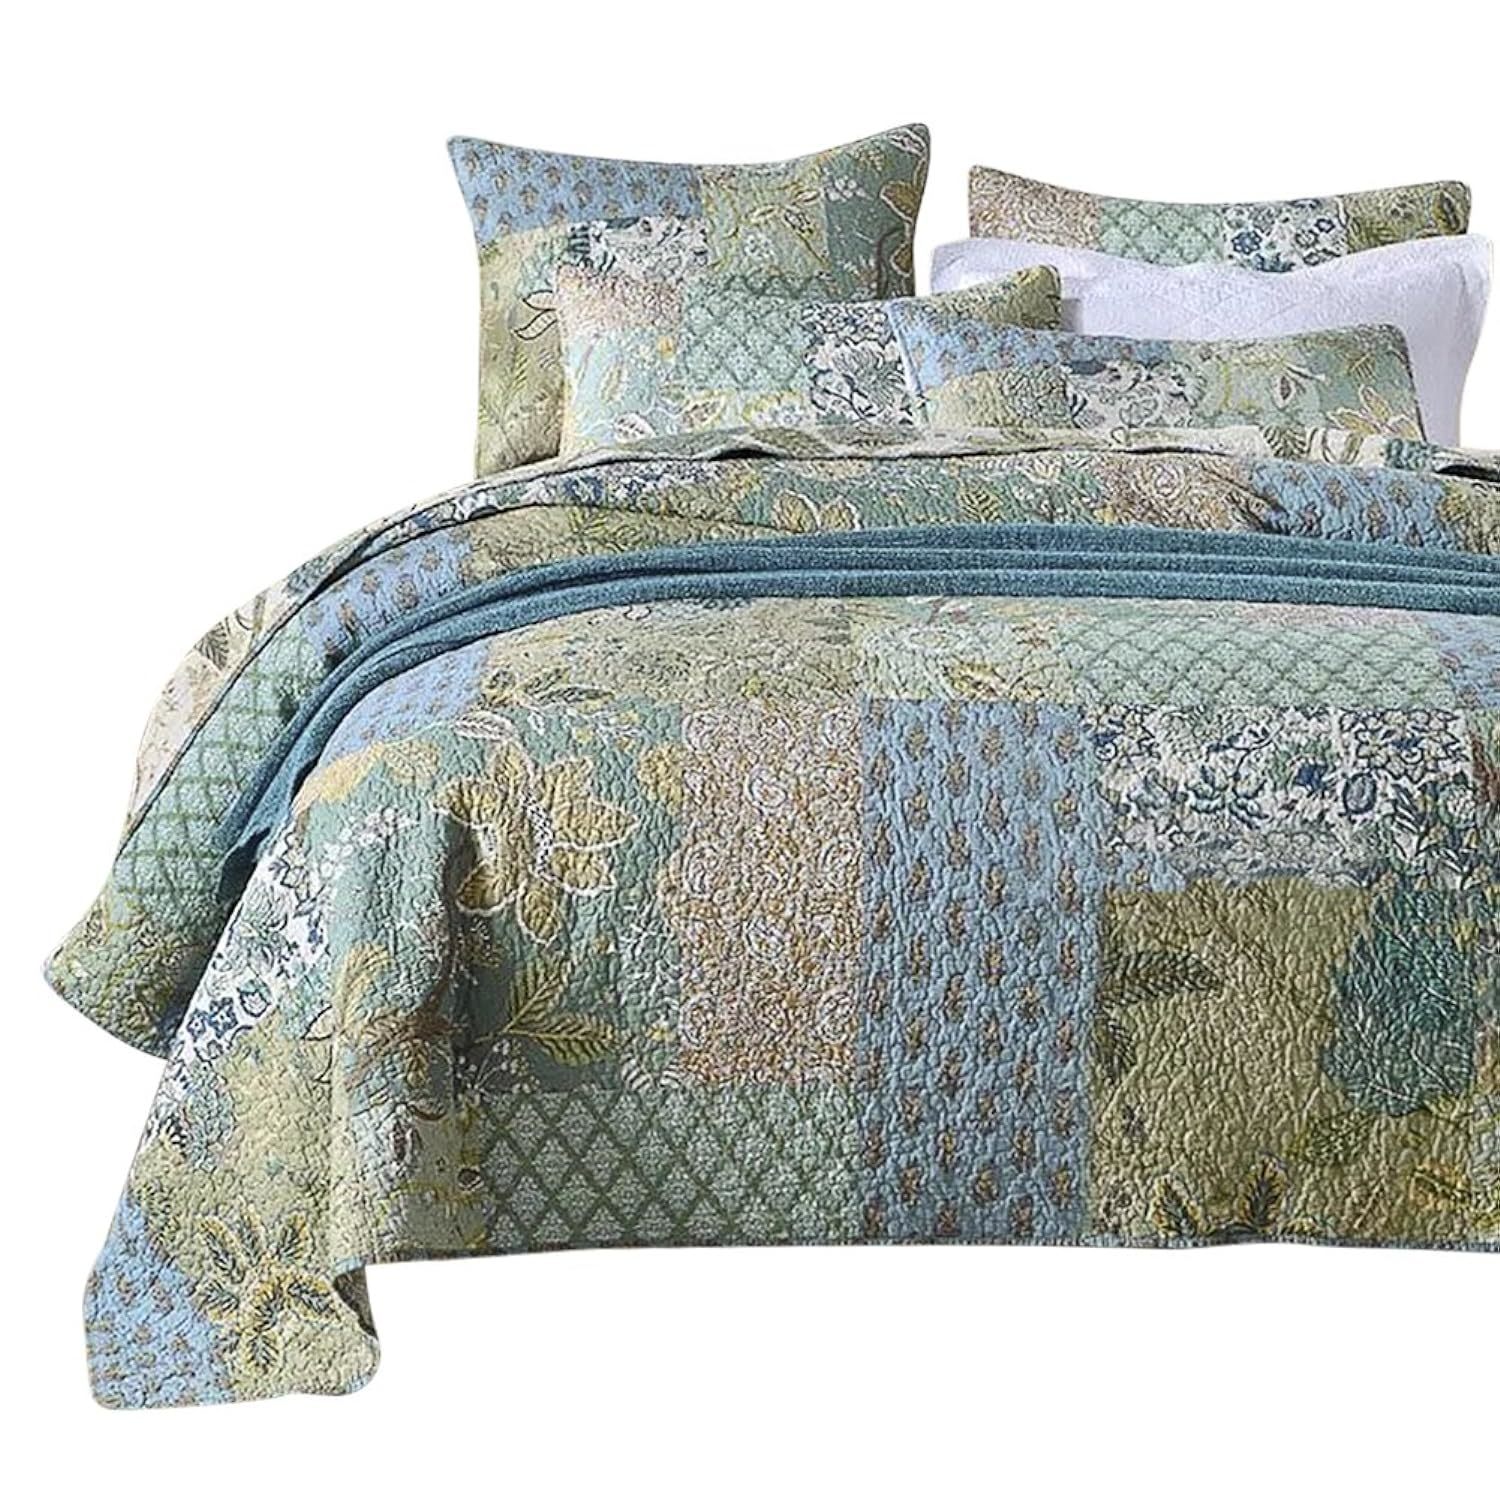 Primary image for Bohemian Floral Pattern Bedspread Quilt Set With Real Stitched Embroidery,Queen 